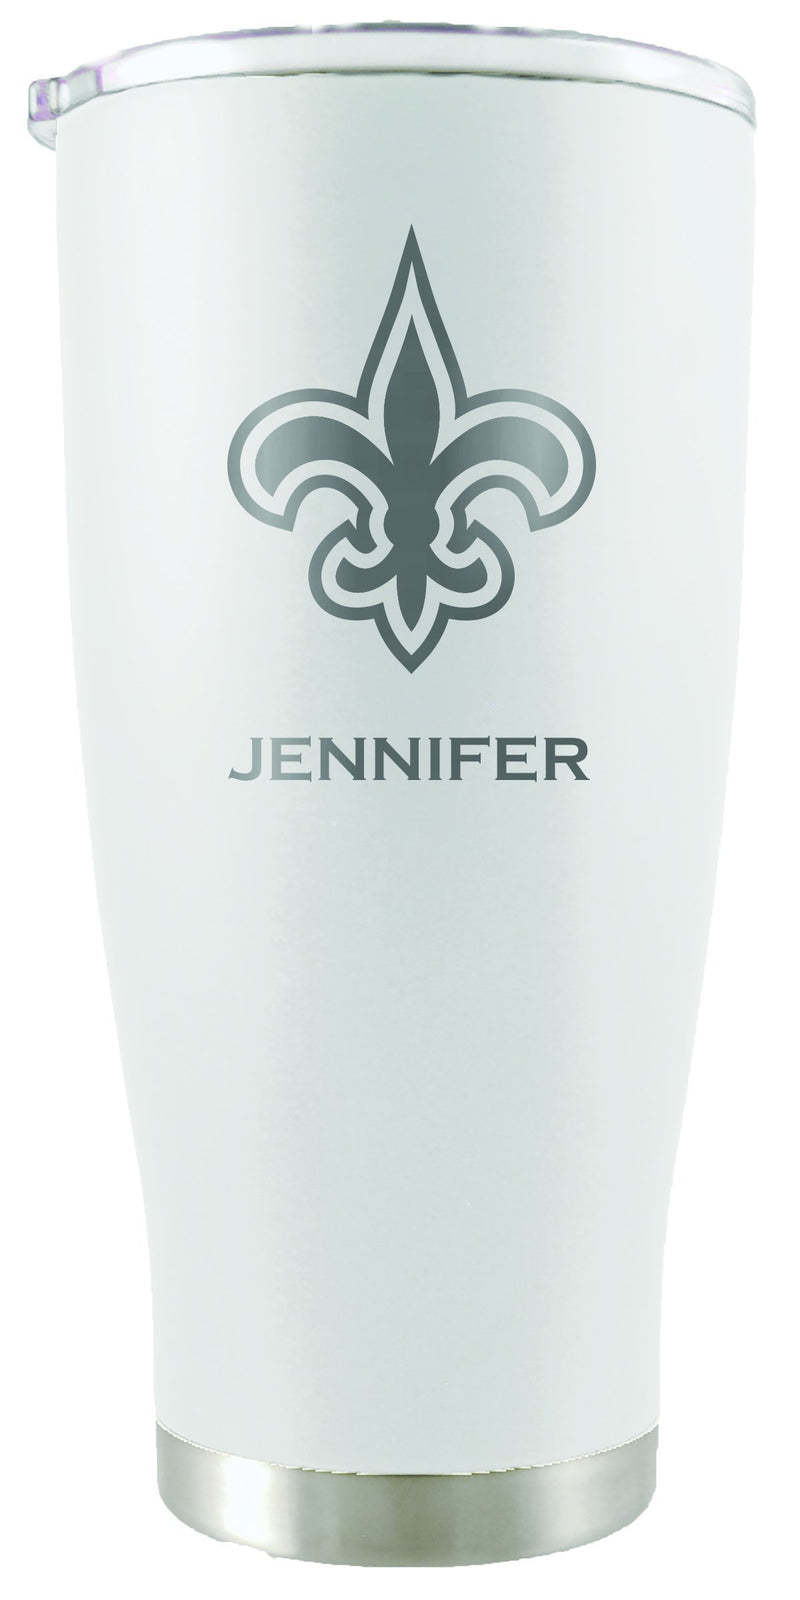 20oz White Personalized Stainless Steel Tumbler | New Orleans Saints
20oz, CurrentProduct, Drinkware_category_All, New Orleans Saints, NFL, NOS, Personalized_Personalized
The Memory Company